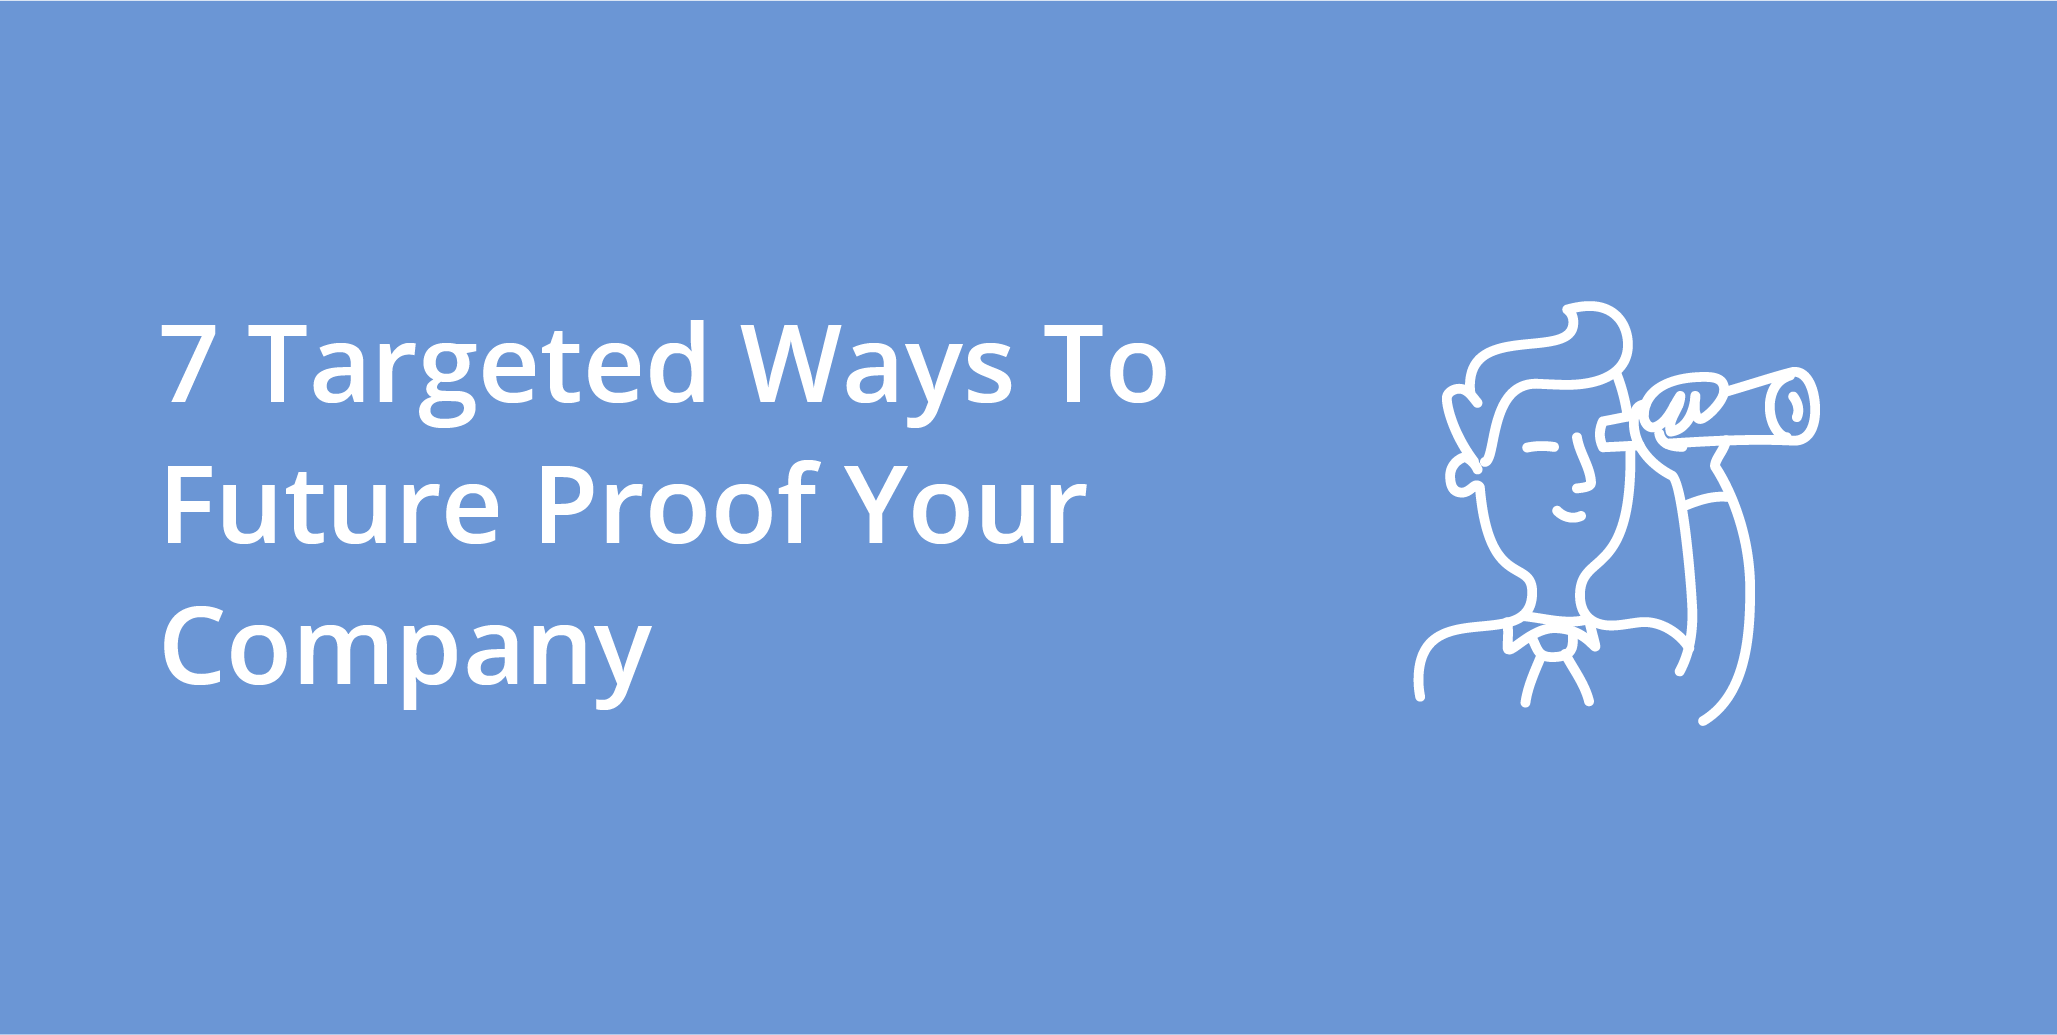 7 Targeted Ways To Future Proof Your Company | Telephones for business